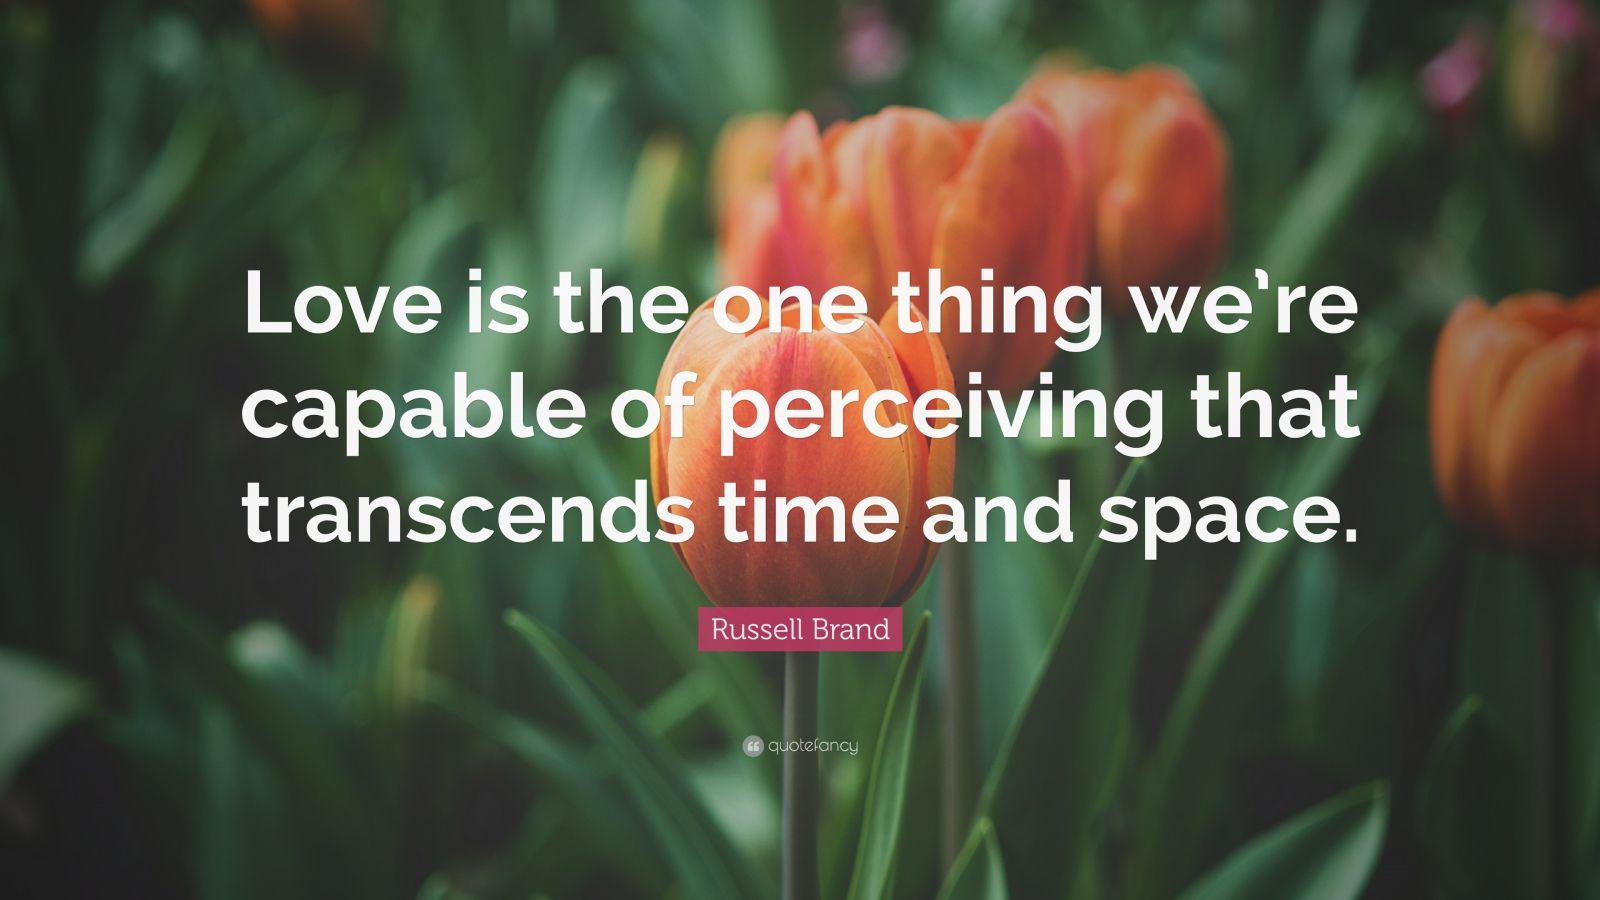 Russell Brand Quote “Love is the one thing we re capable of perceiving